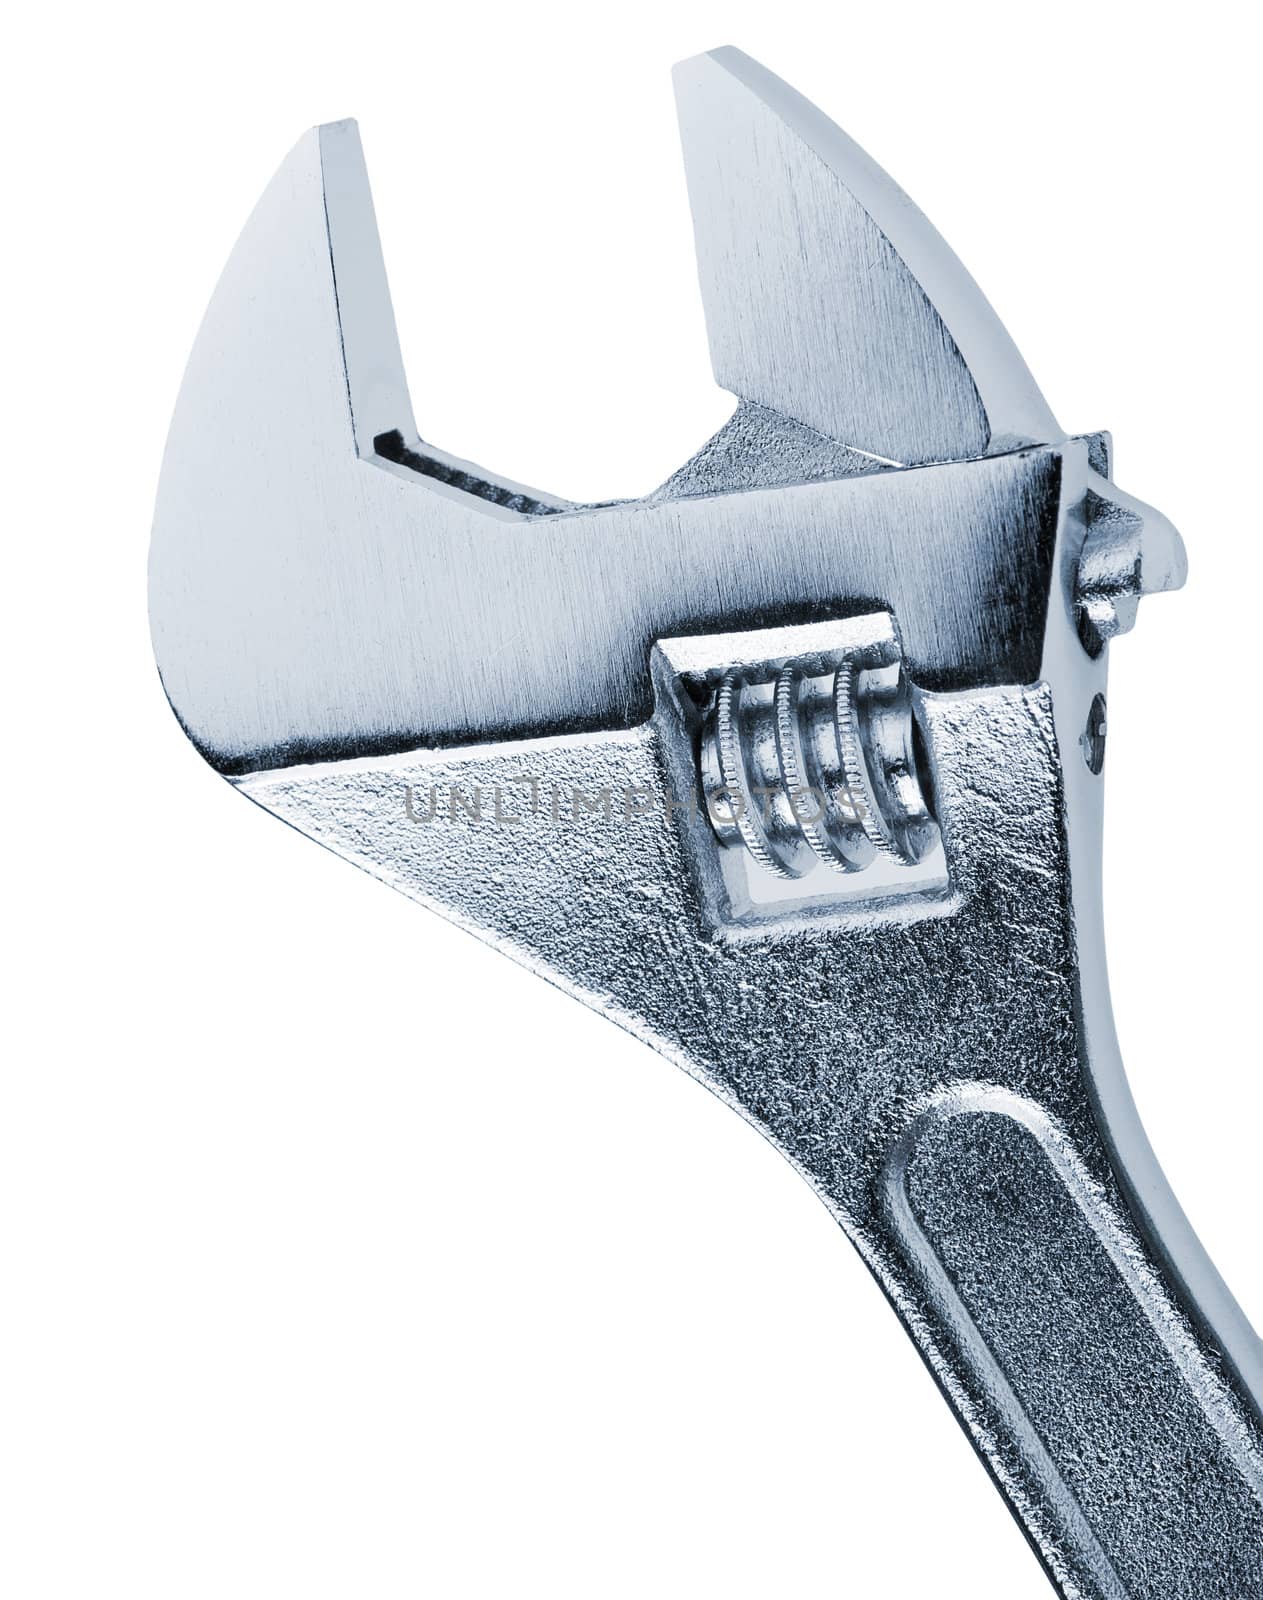 Adjustable spanner. It is isolated on a white background.